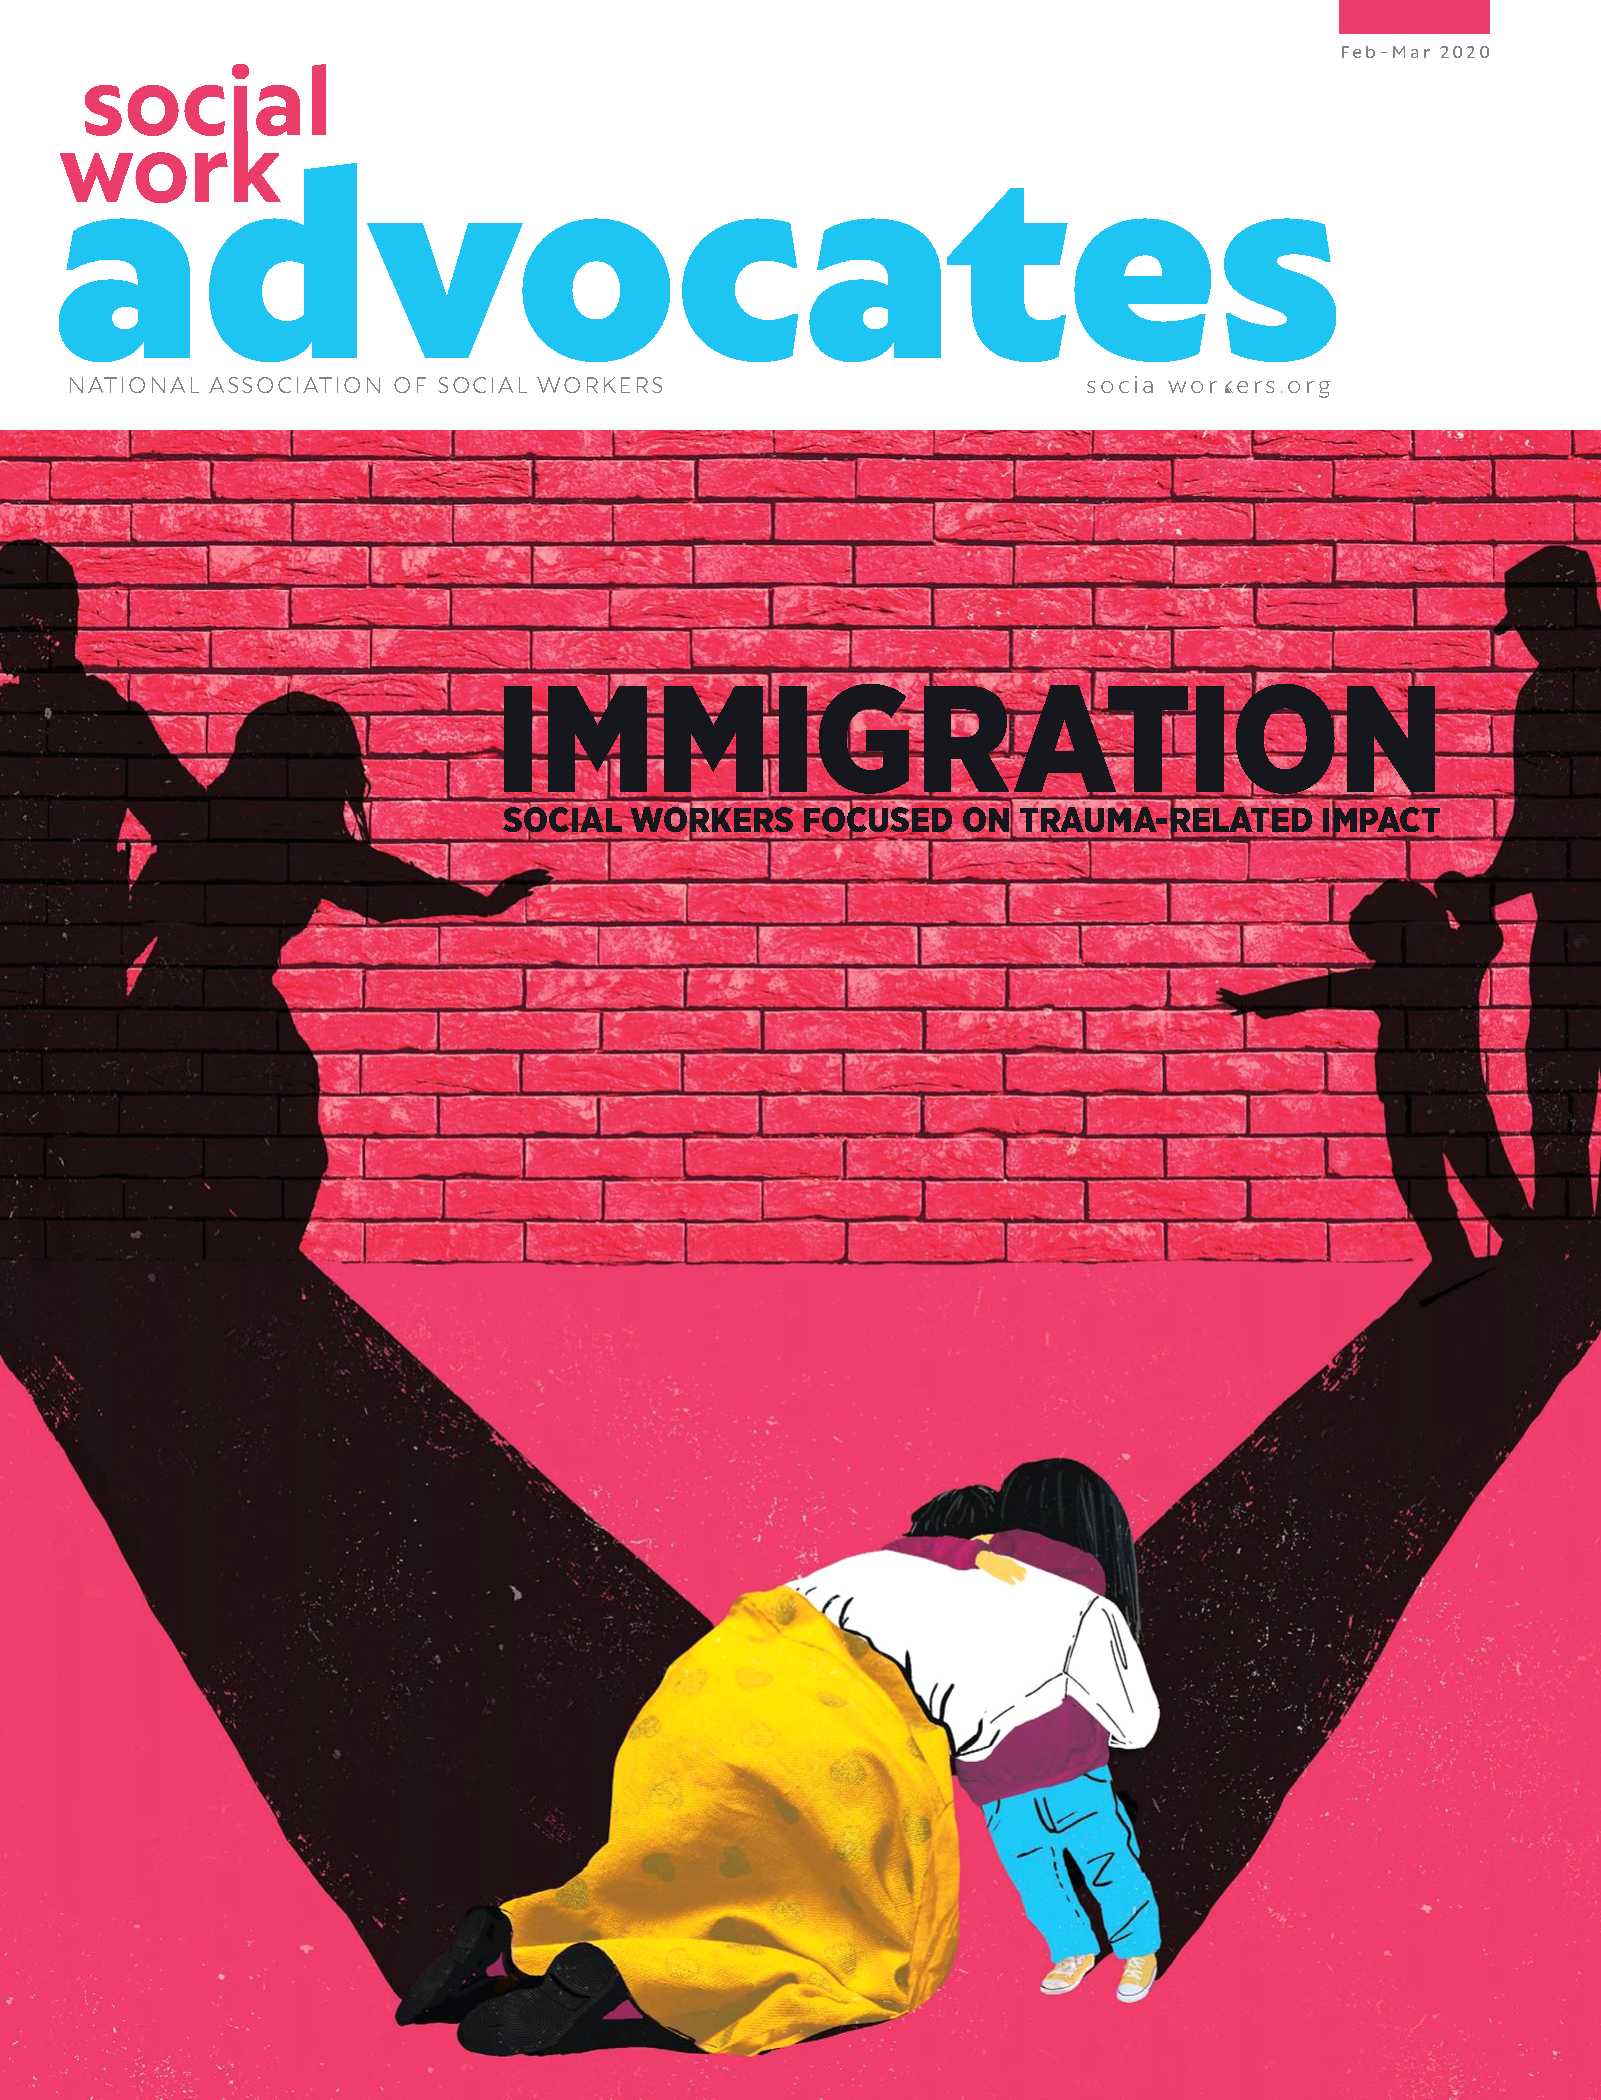 February-March 2020 Issue of Social Work Magazine Featured Immigration Issues